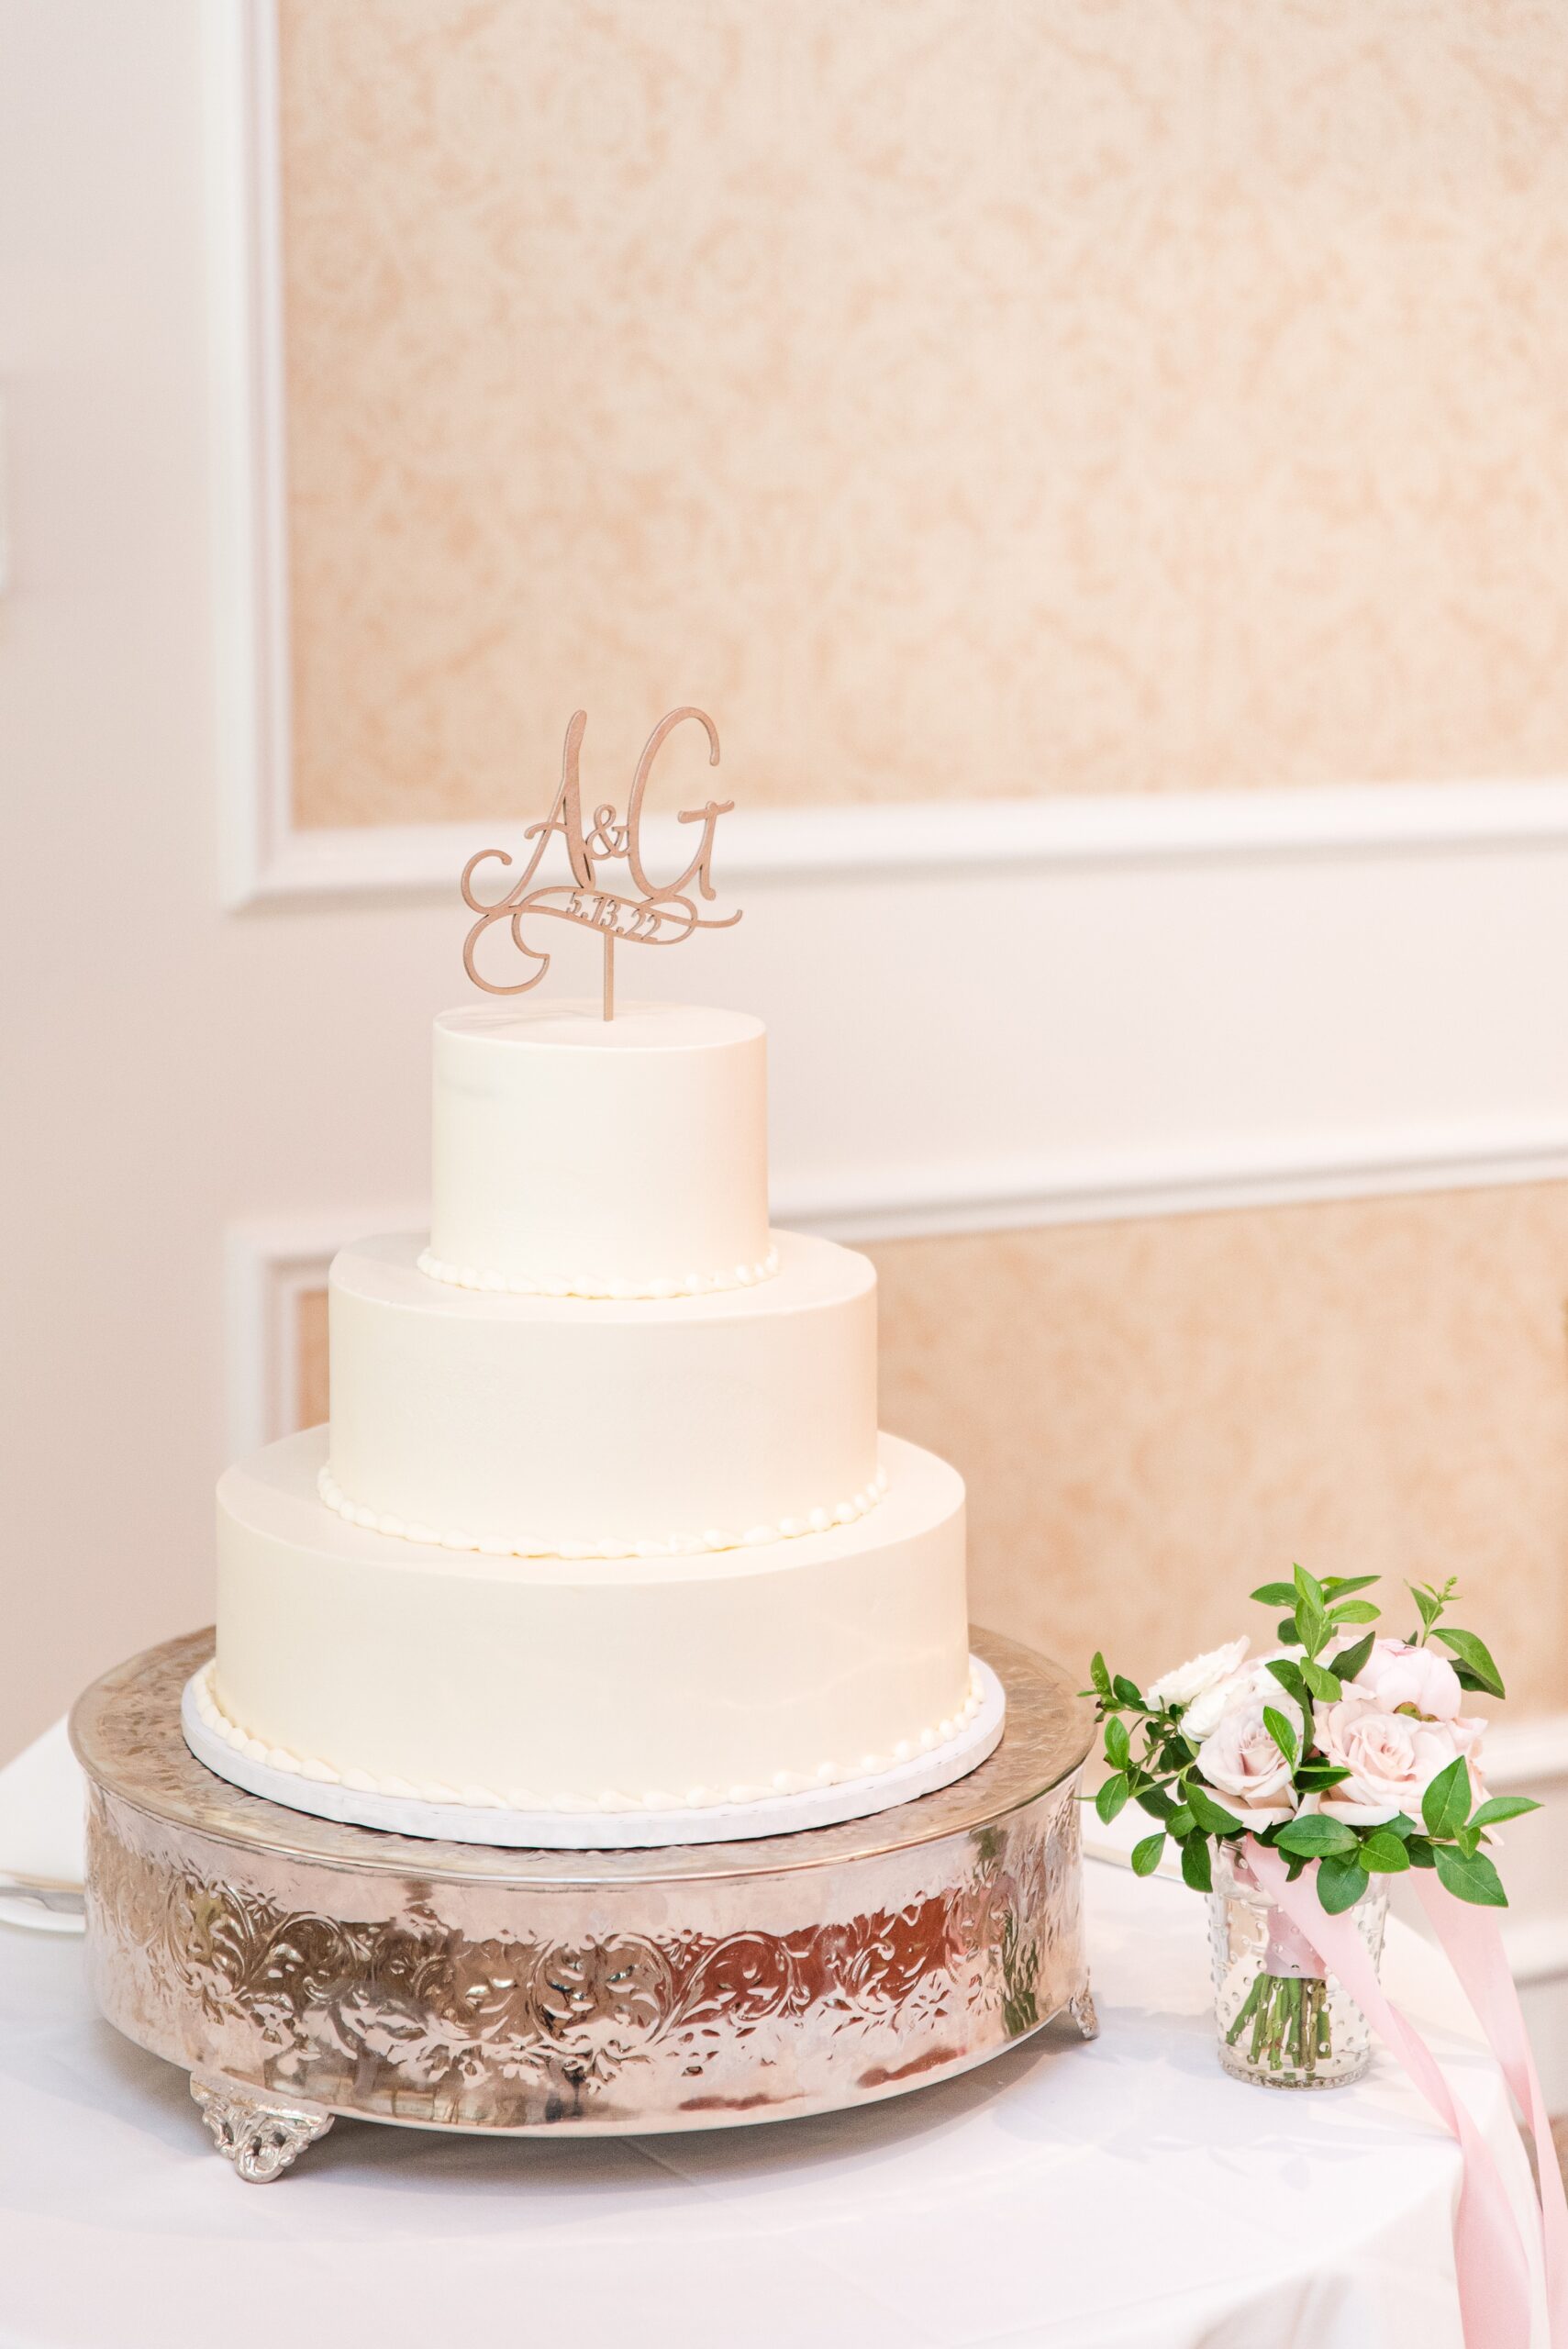 Details of a three tier white wedding cake on a silver stand